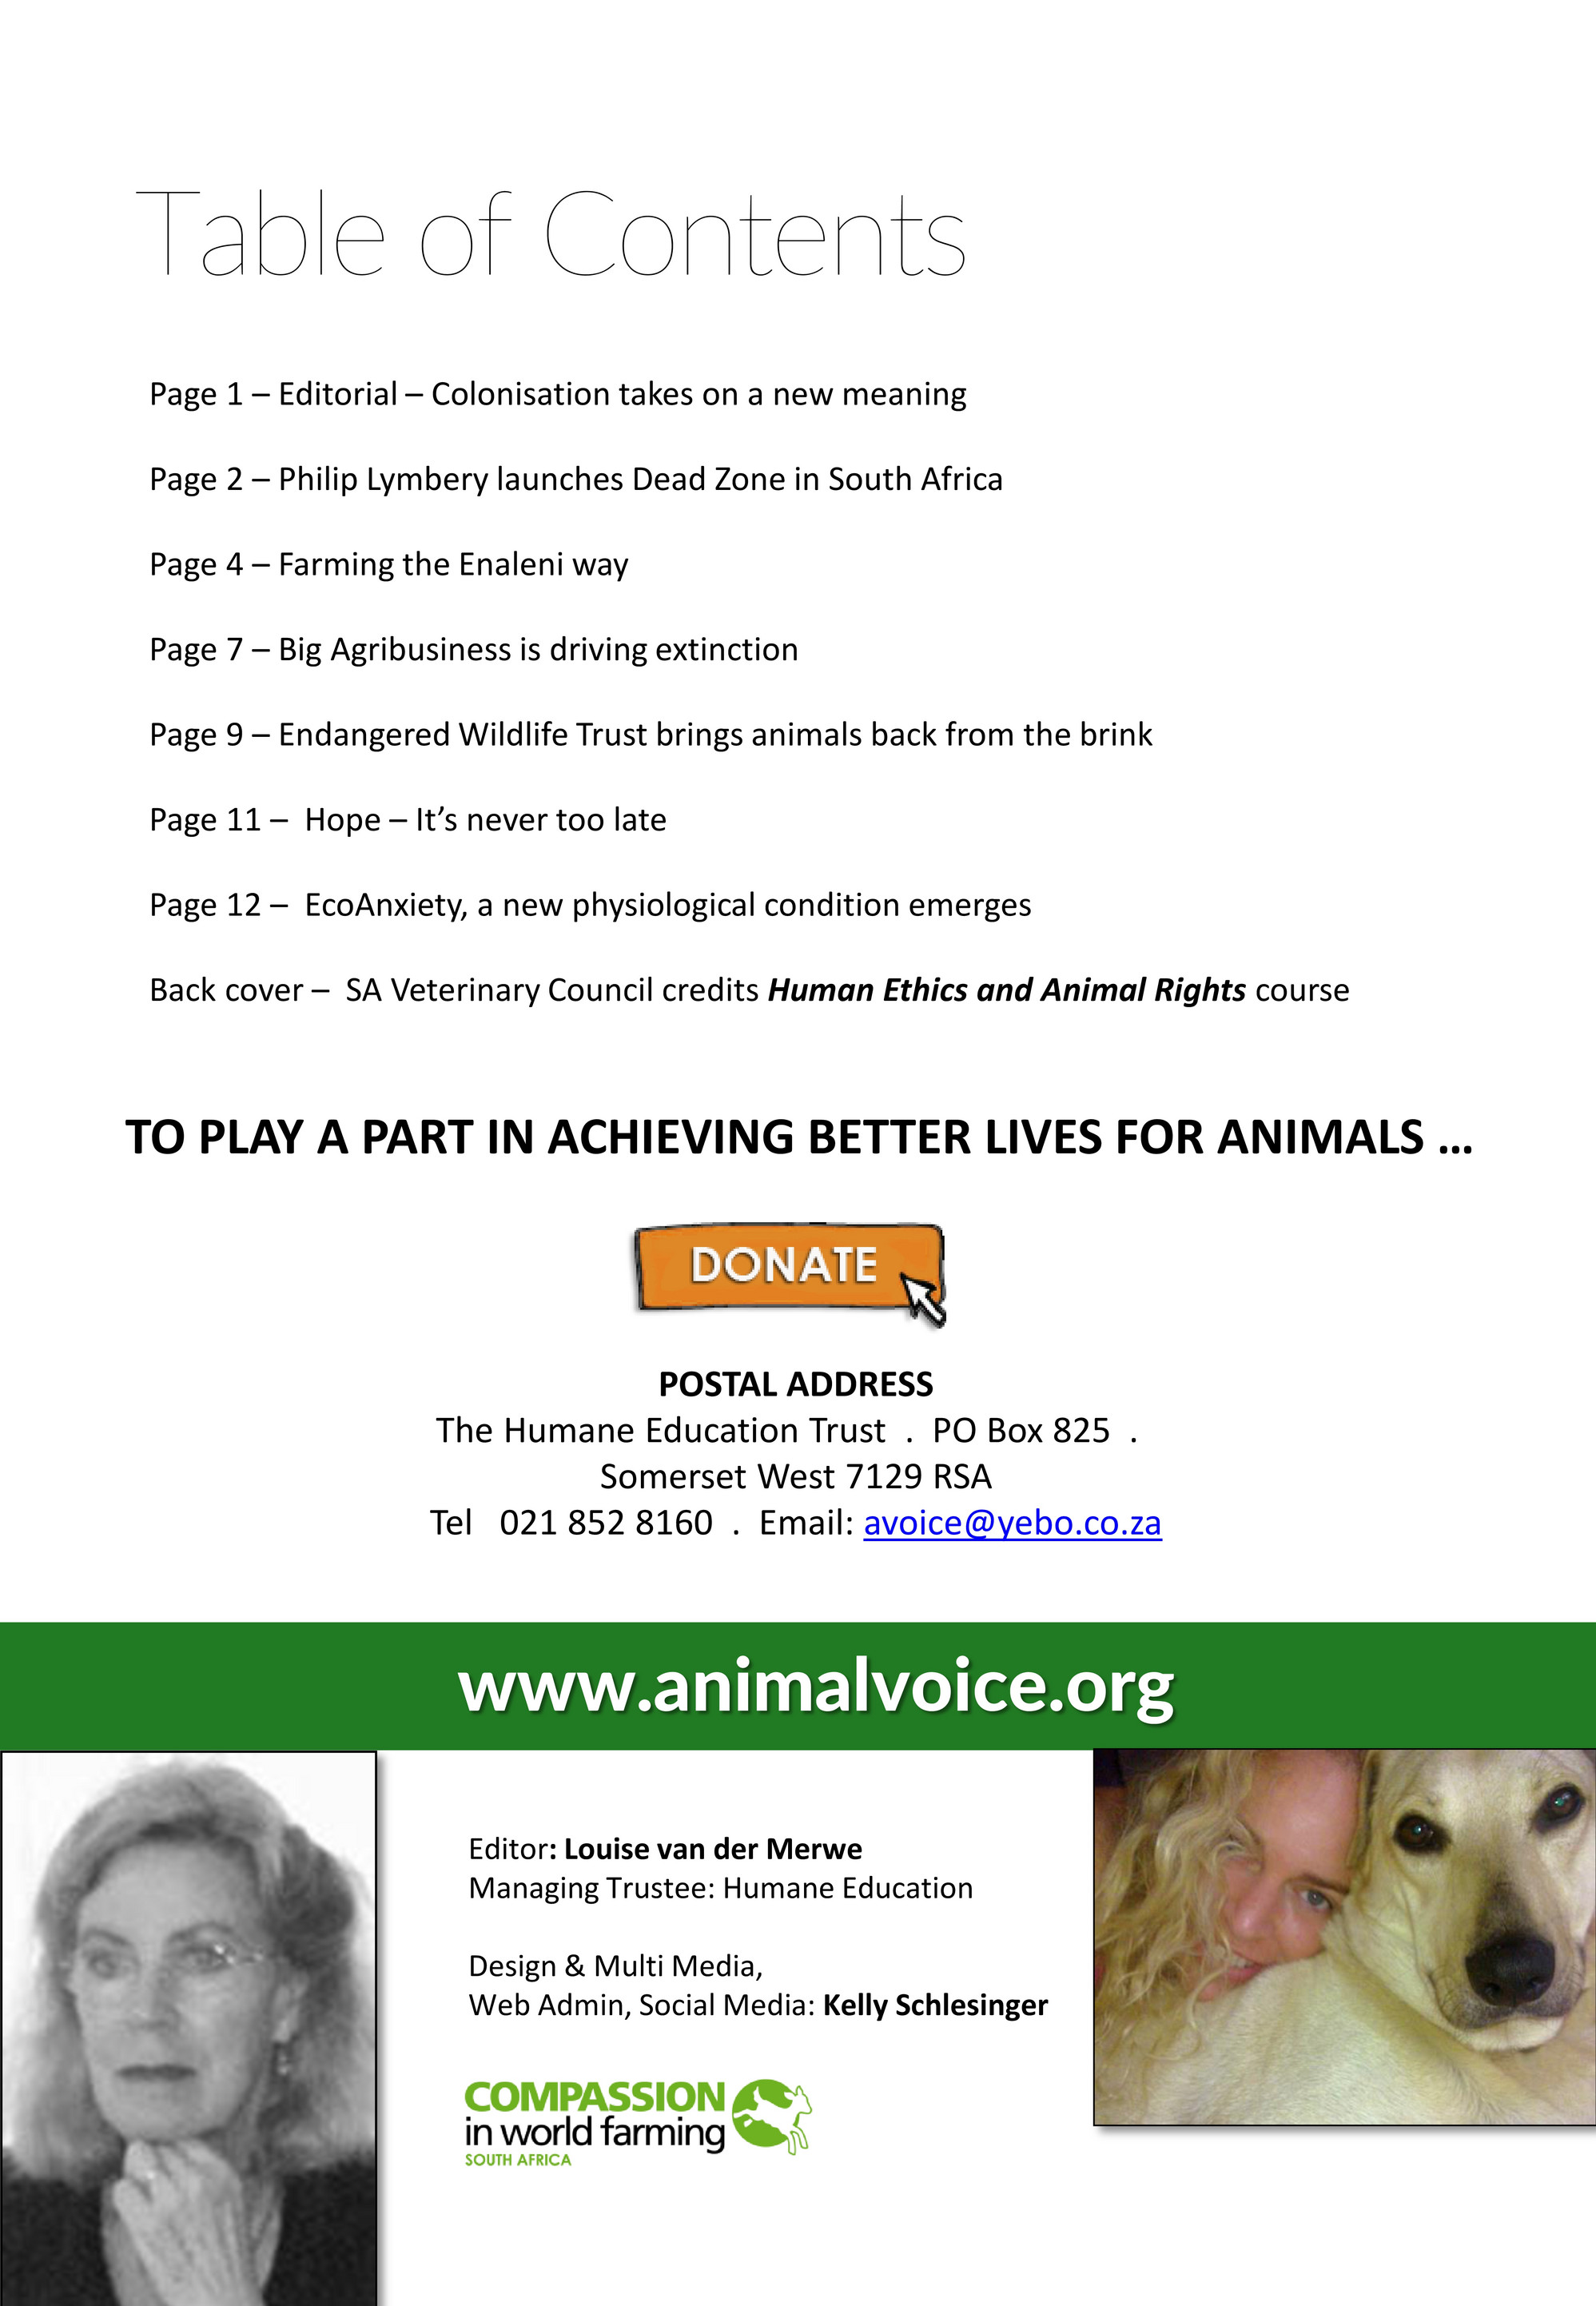 My publications - Animal Voice August 2017 - Page 4-5 - Created with  